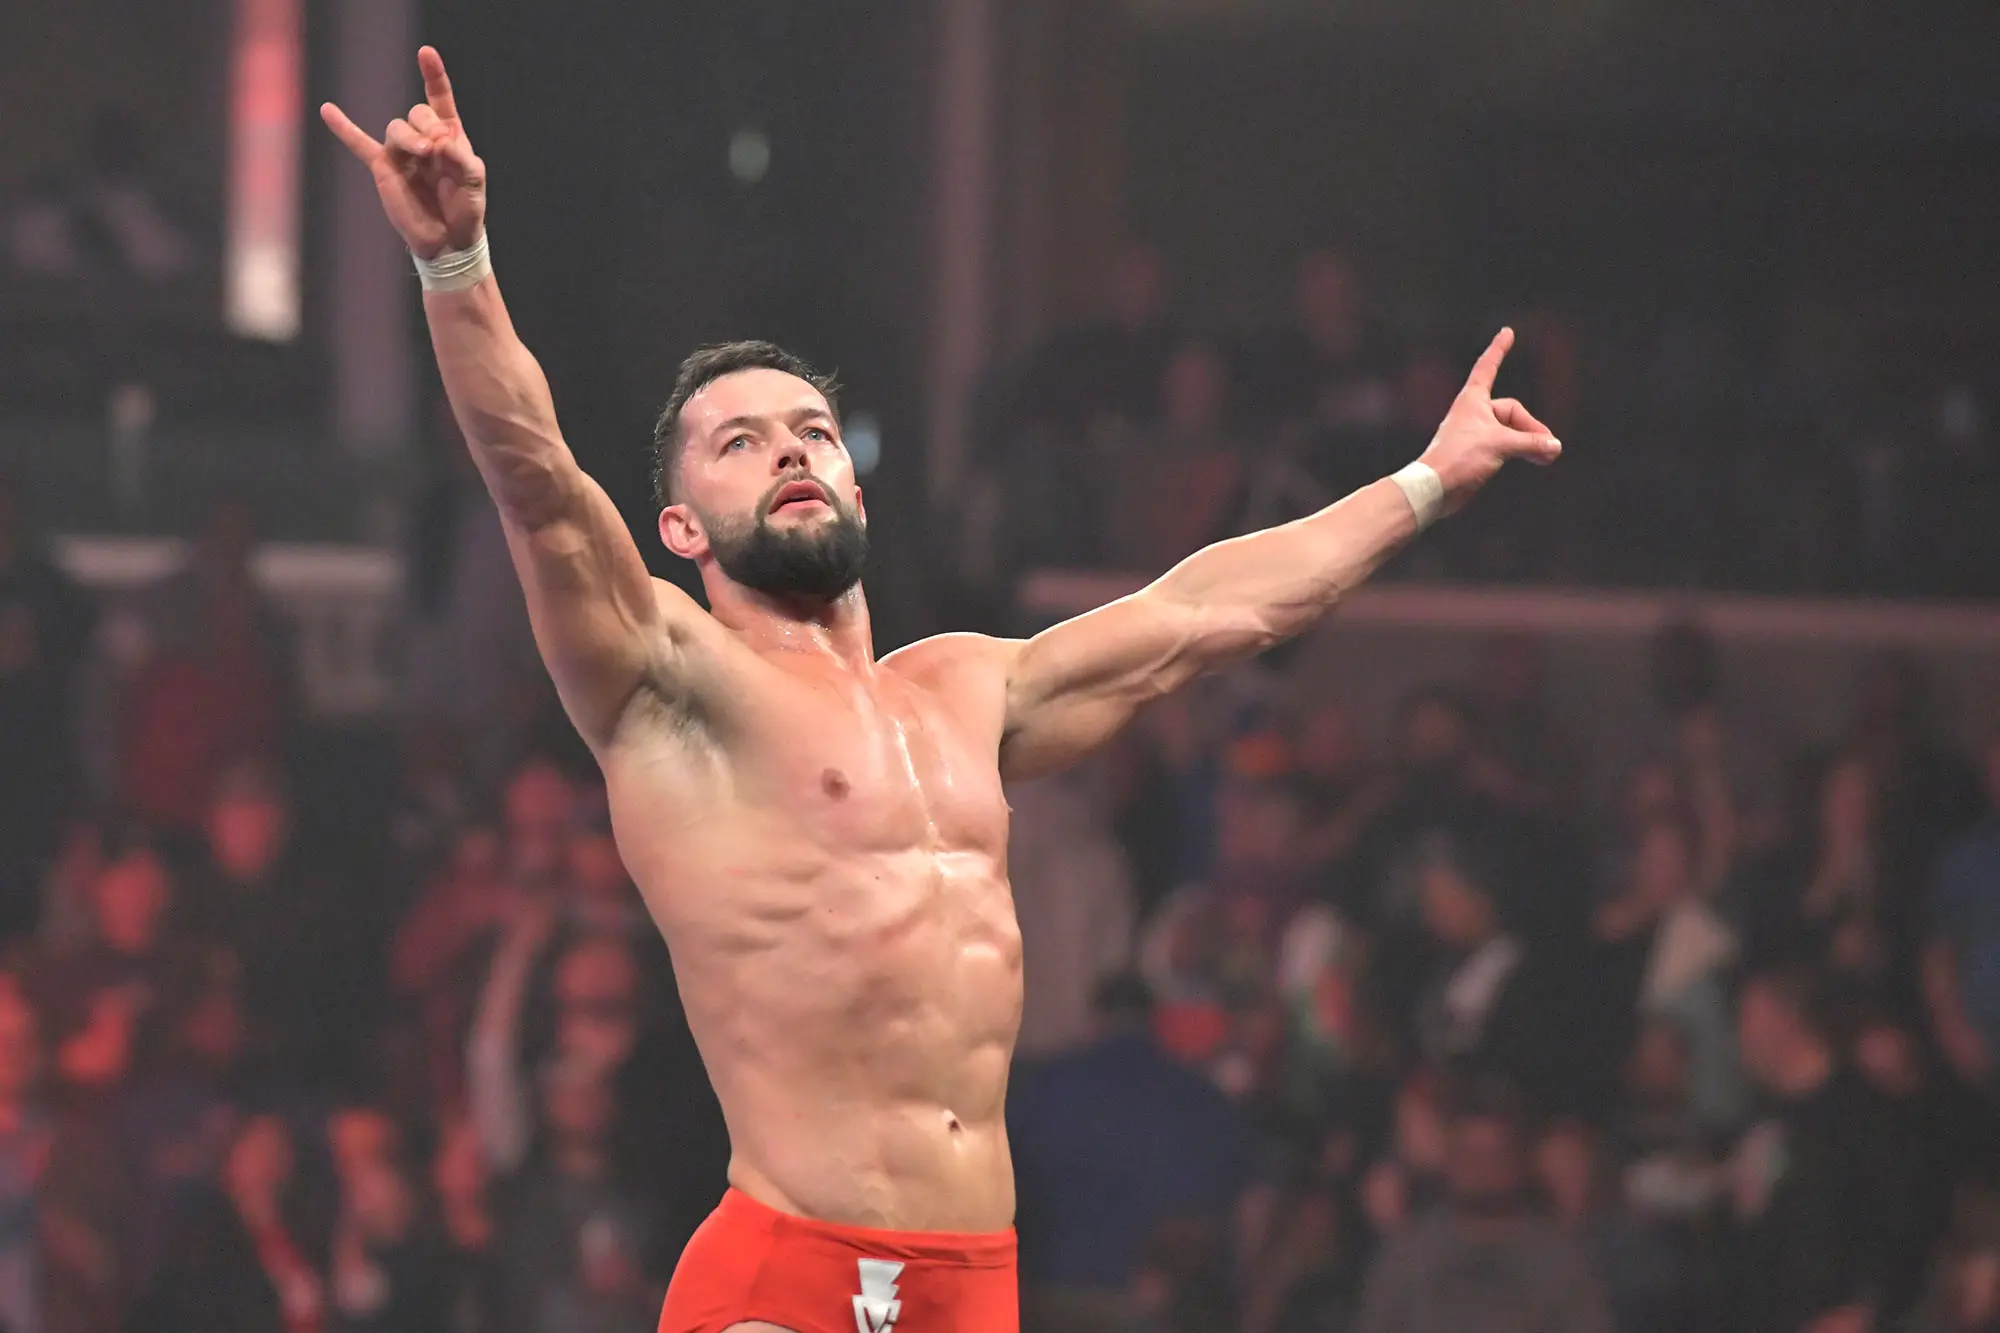 The Evolution of Finn Balor: From "The Crow" Nod to WrestleMania 40 Speculations